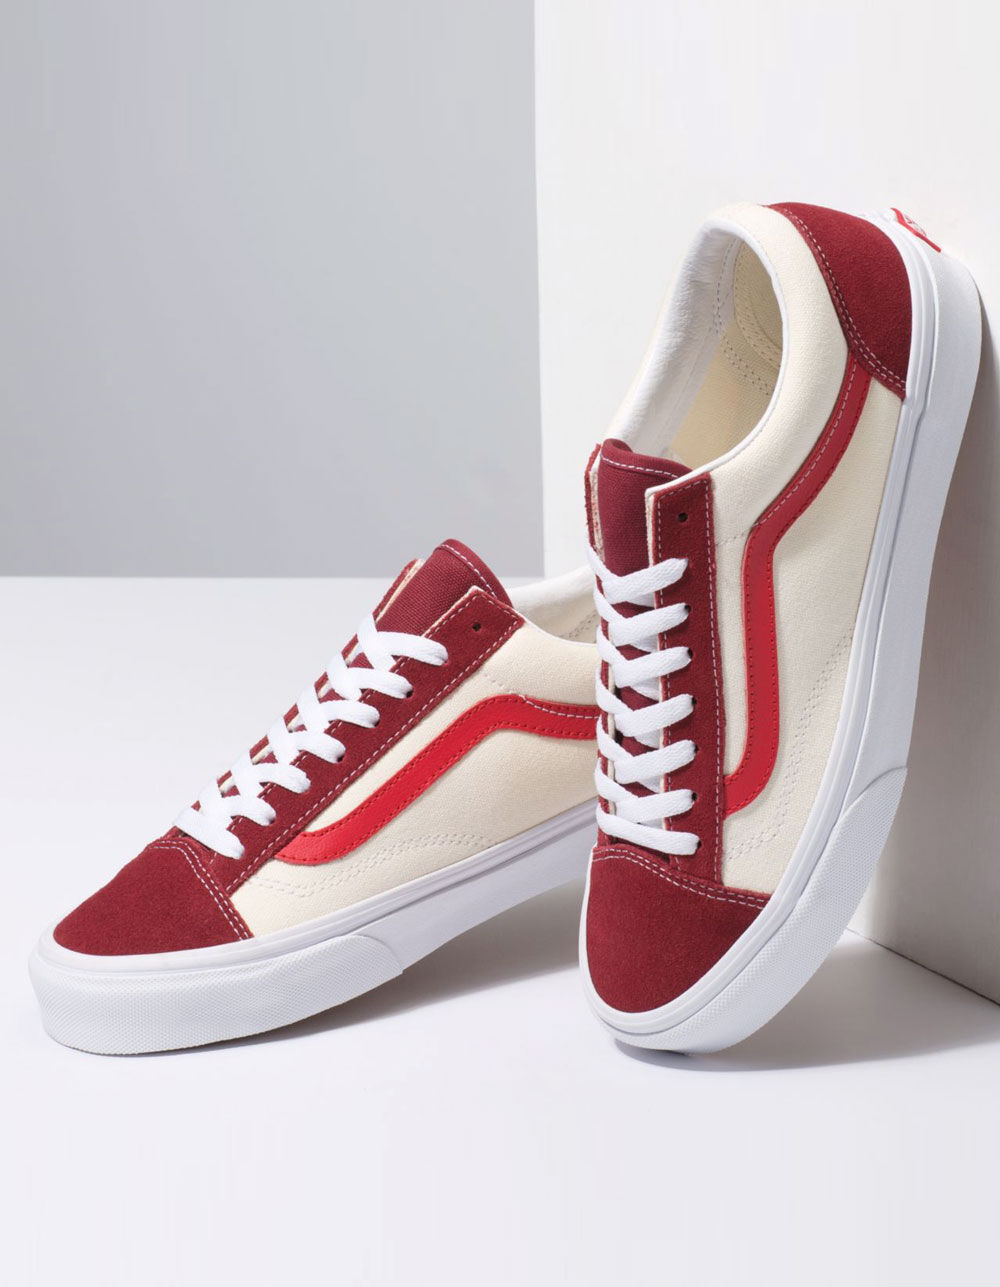 VANS Retro Sport Style 36 Biking Red & Poinsettia Shoes image number 3